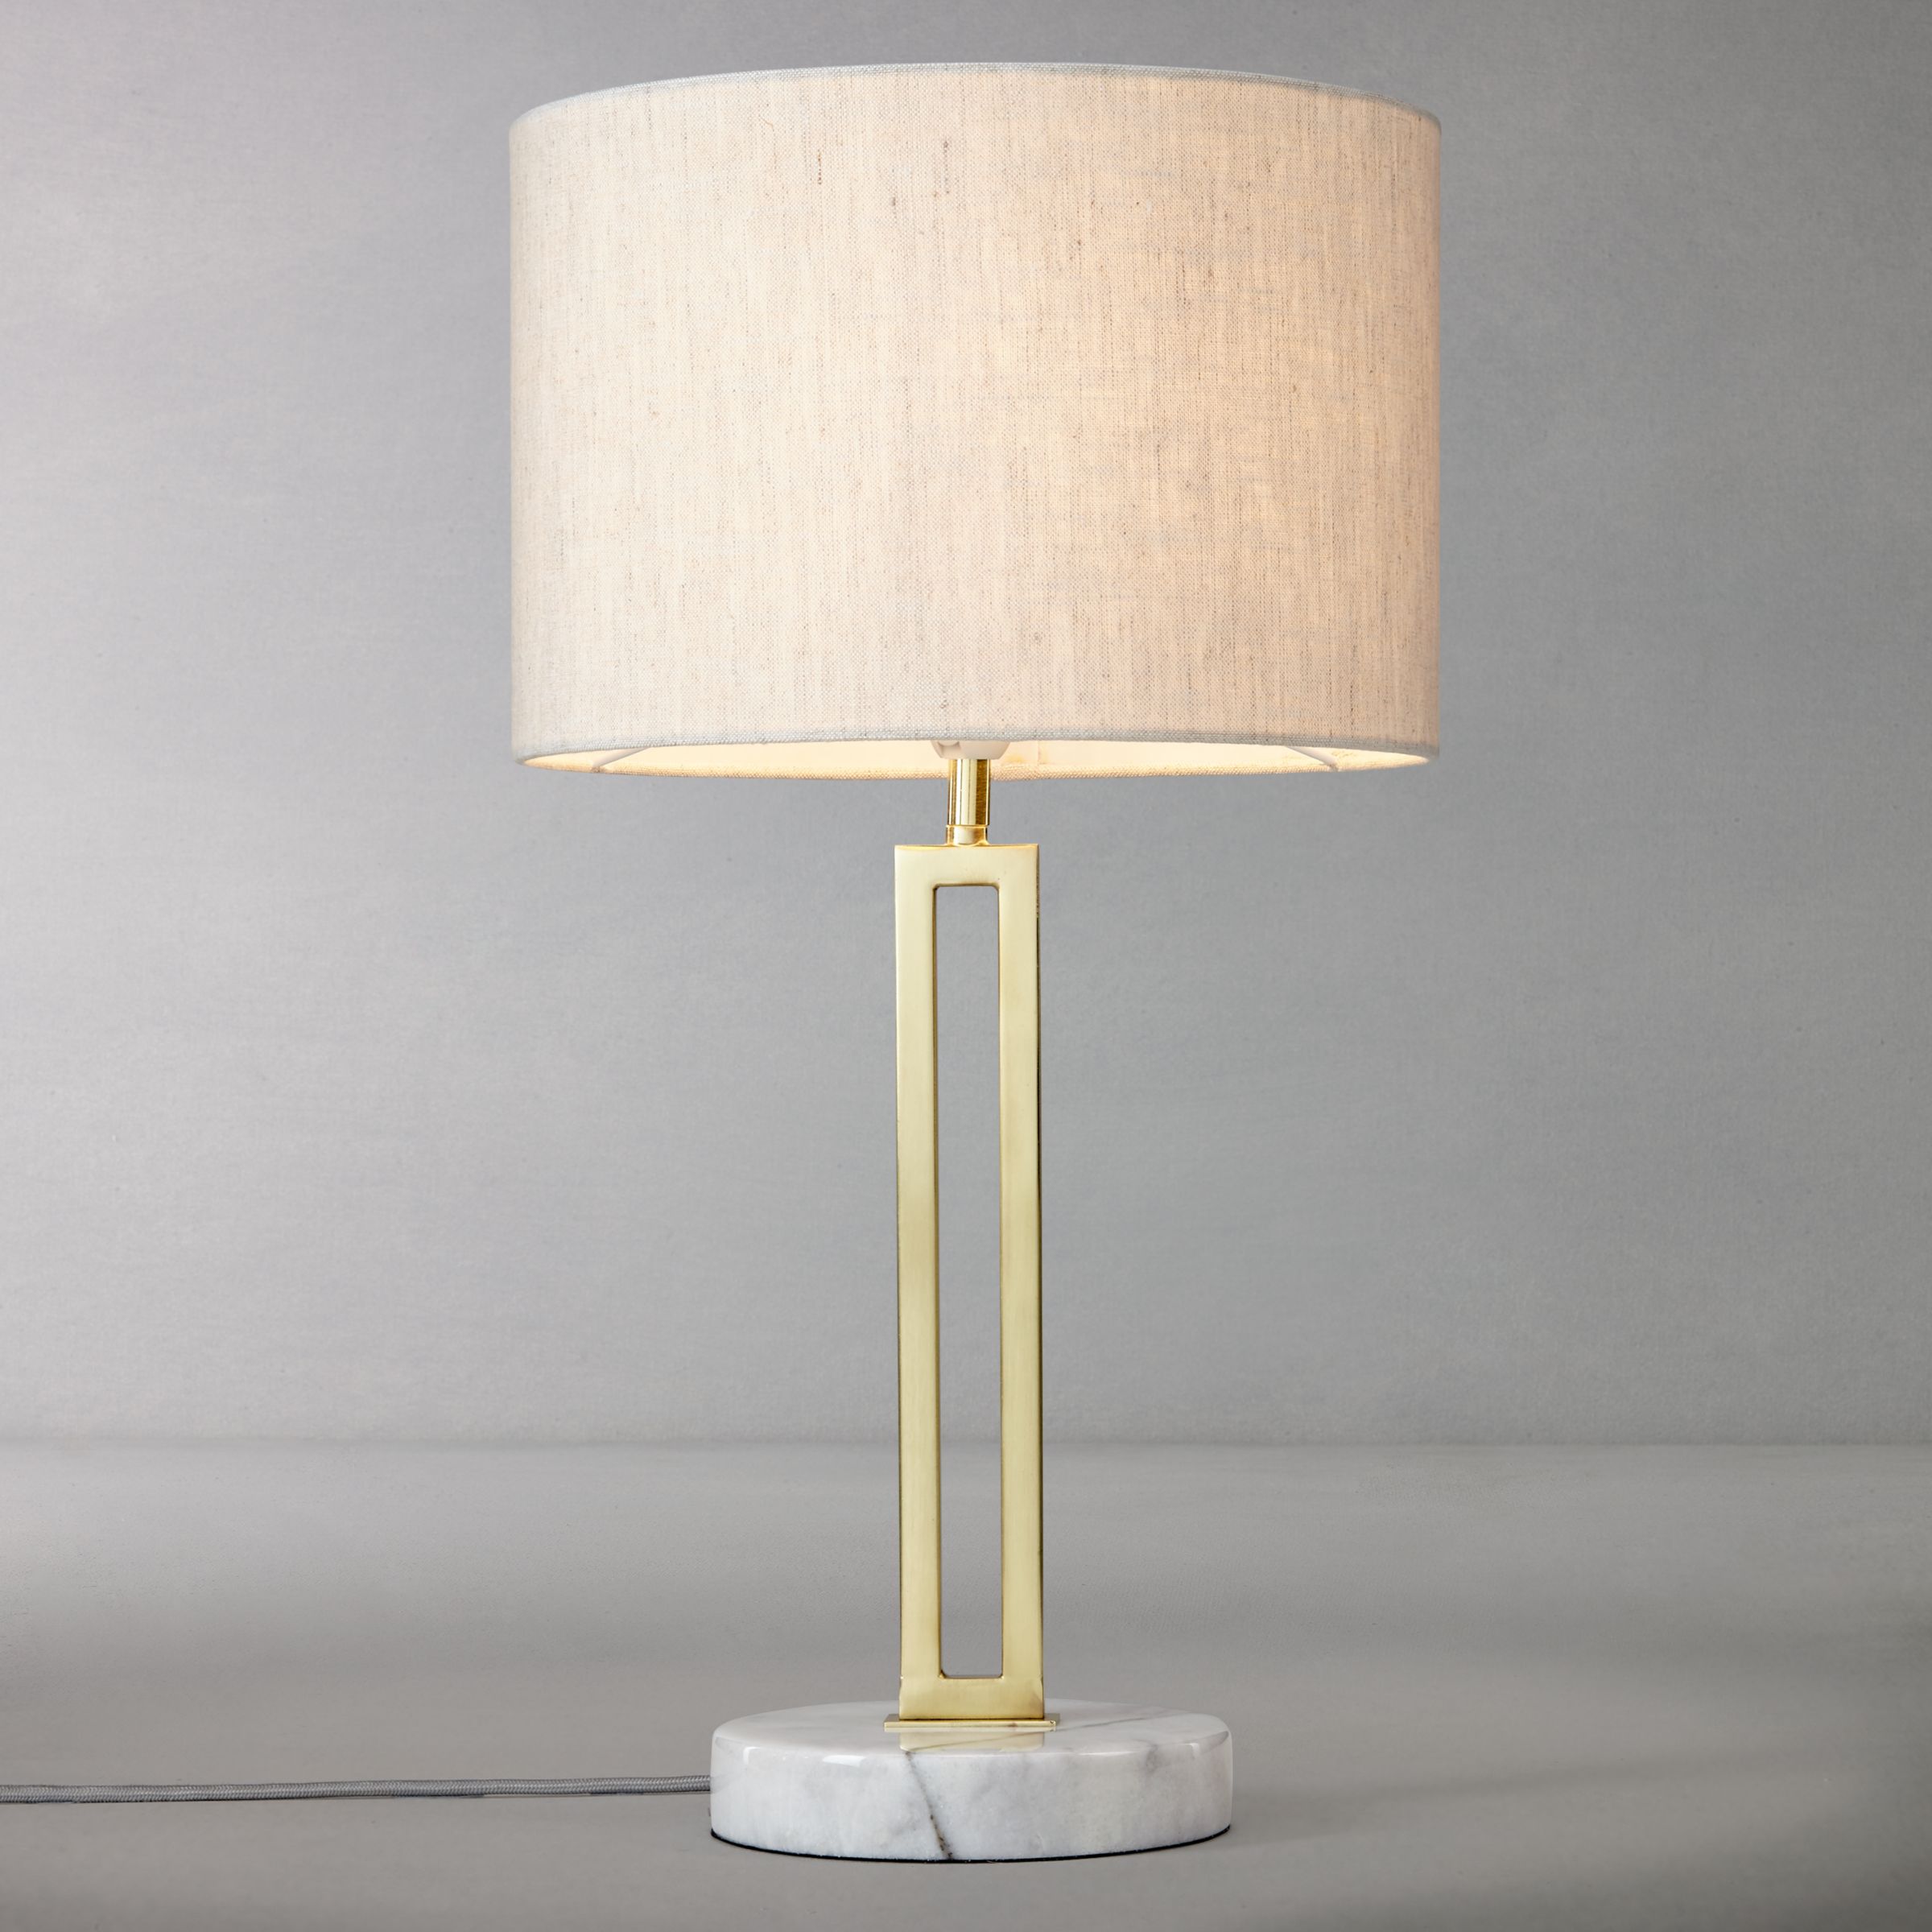 John Lewis & Partners Emmerson Twin Post Table Lamp, Satin Brass